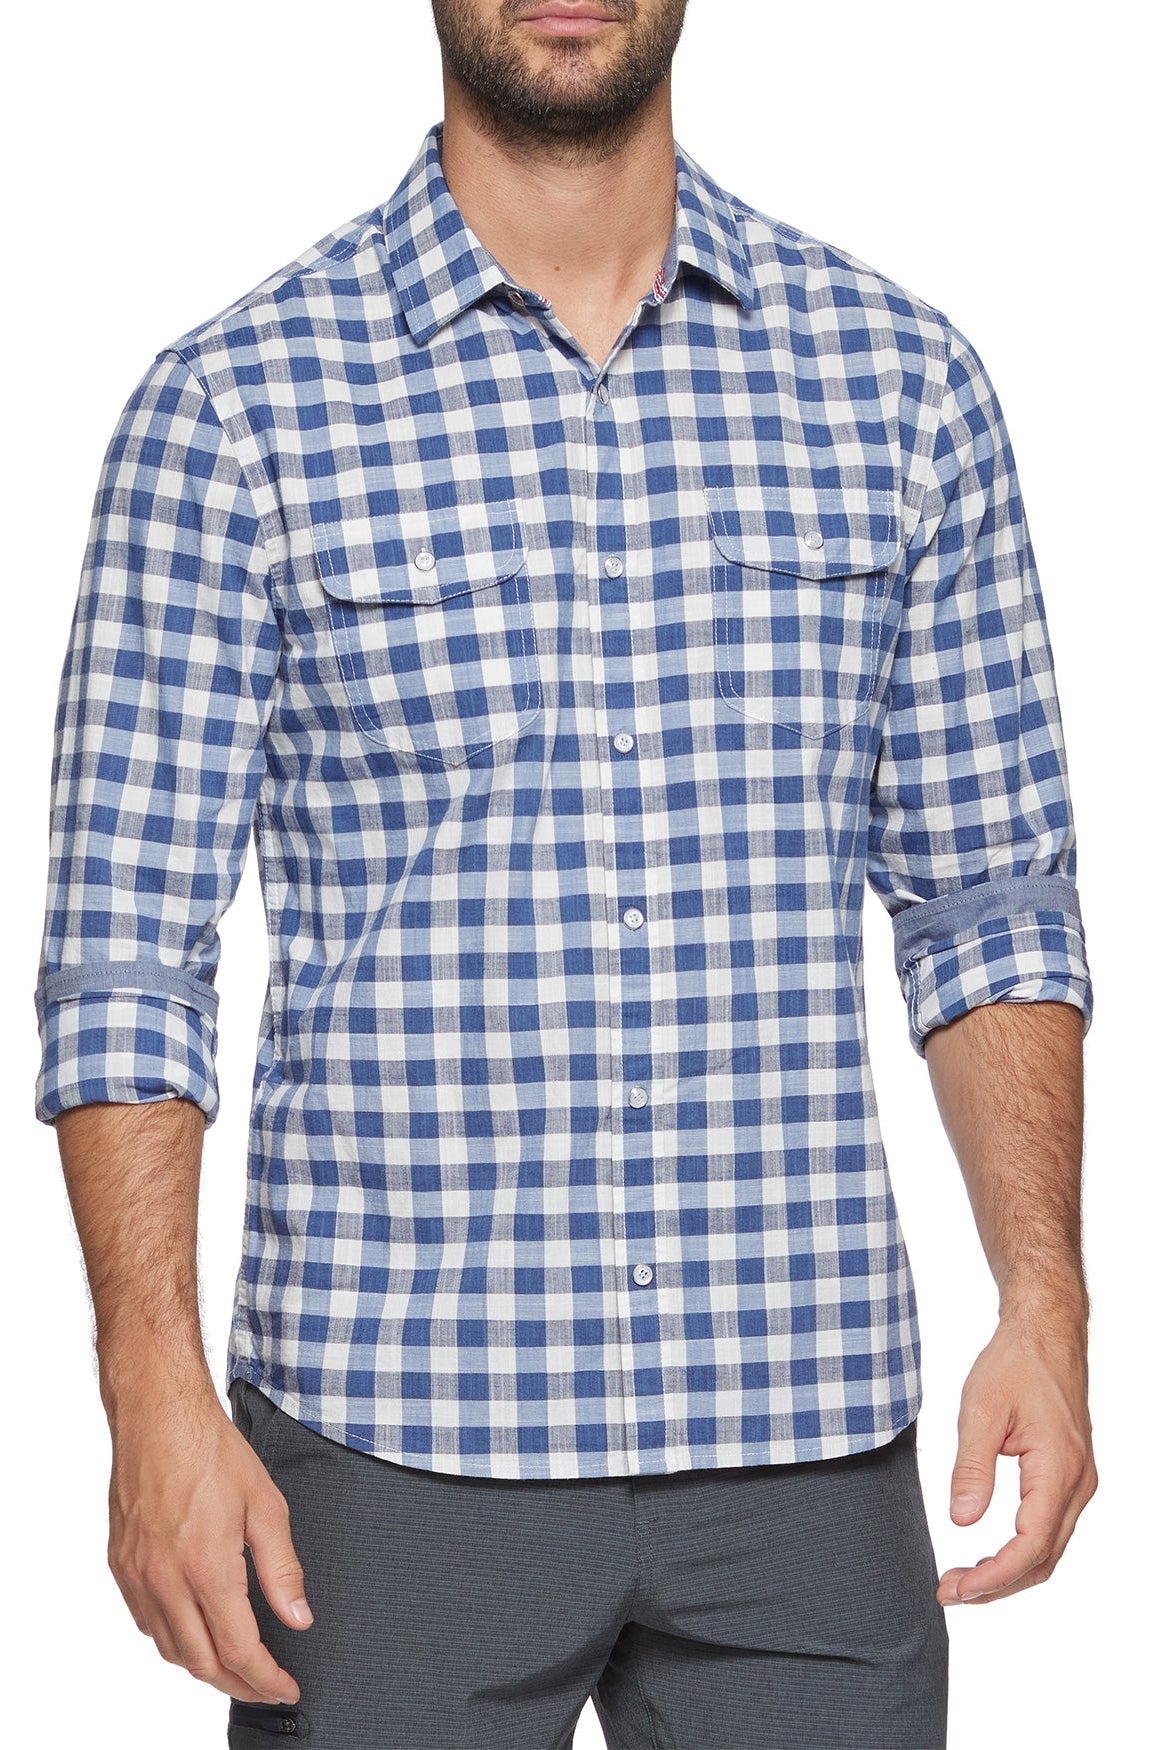 Harbuck Slub Gingham Shirt-Men's Tops-Vixen Collection, Day Spa and Women's Boutique Located in Seattle, Washington